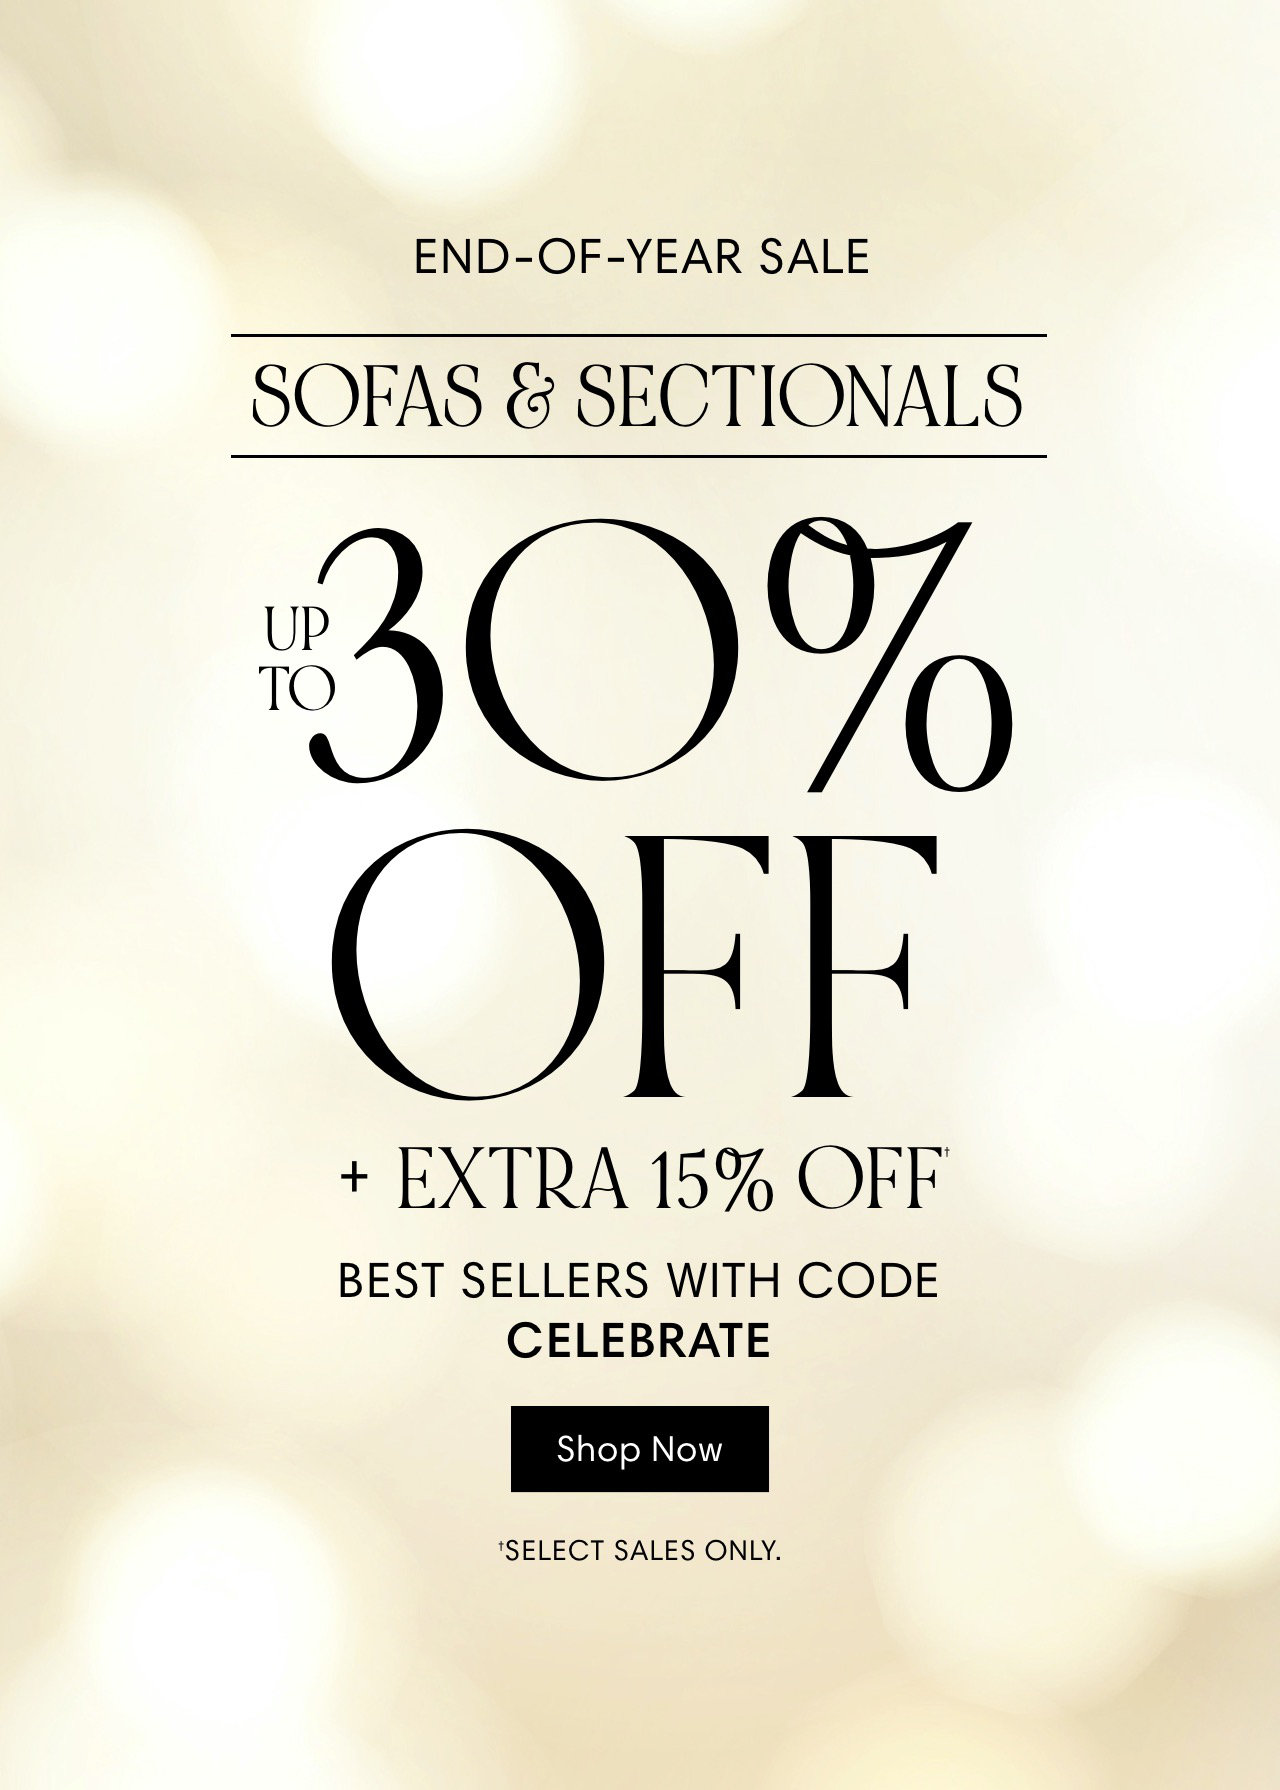 END-OF-YEAR SALE SOFAS SECTIONALS EXTRA 15% OFF BEST SELLERS WITH CODE CELEBRATE Shop Now 'SELECT SALES ONLY. 